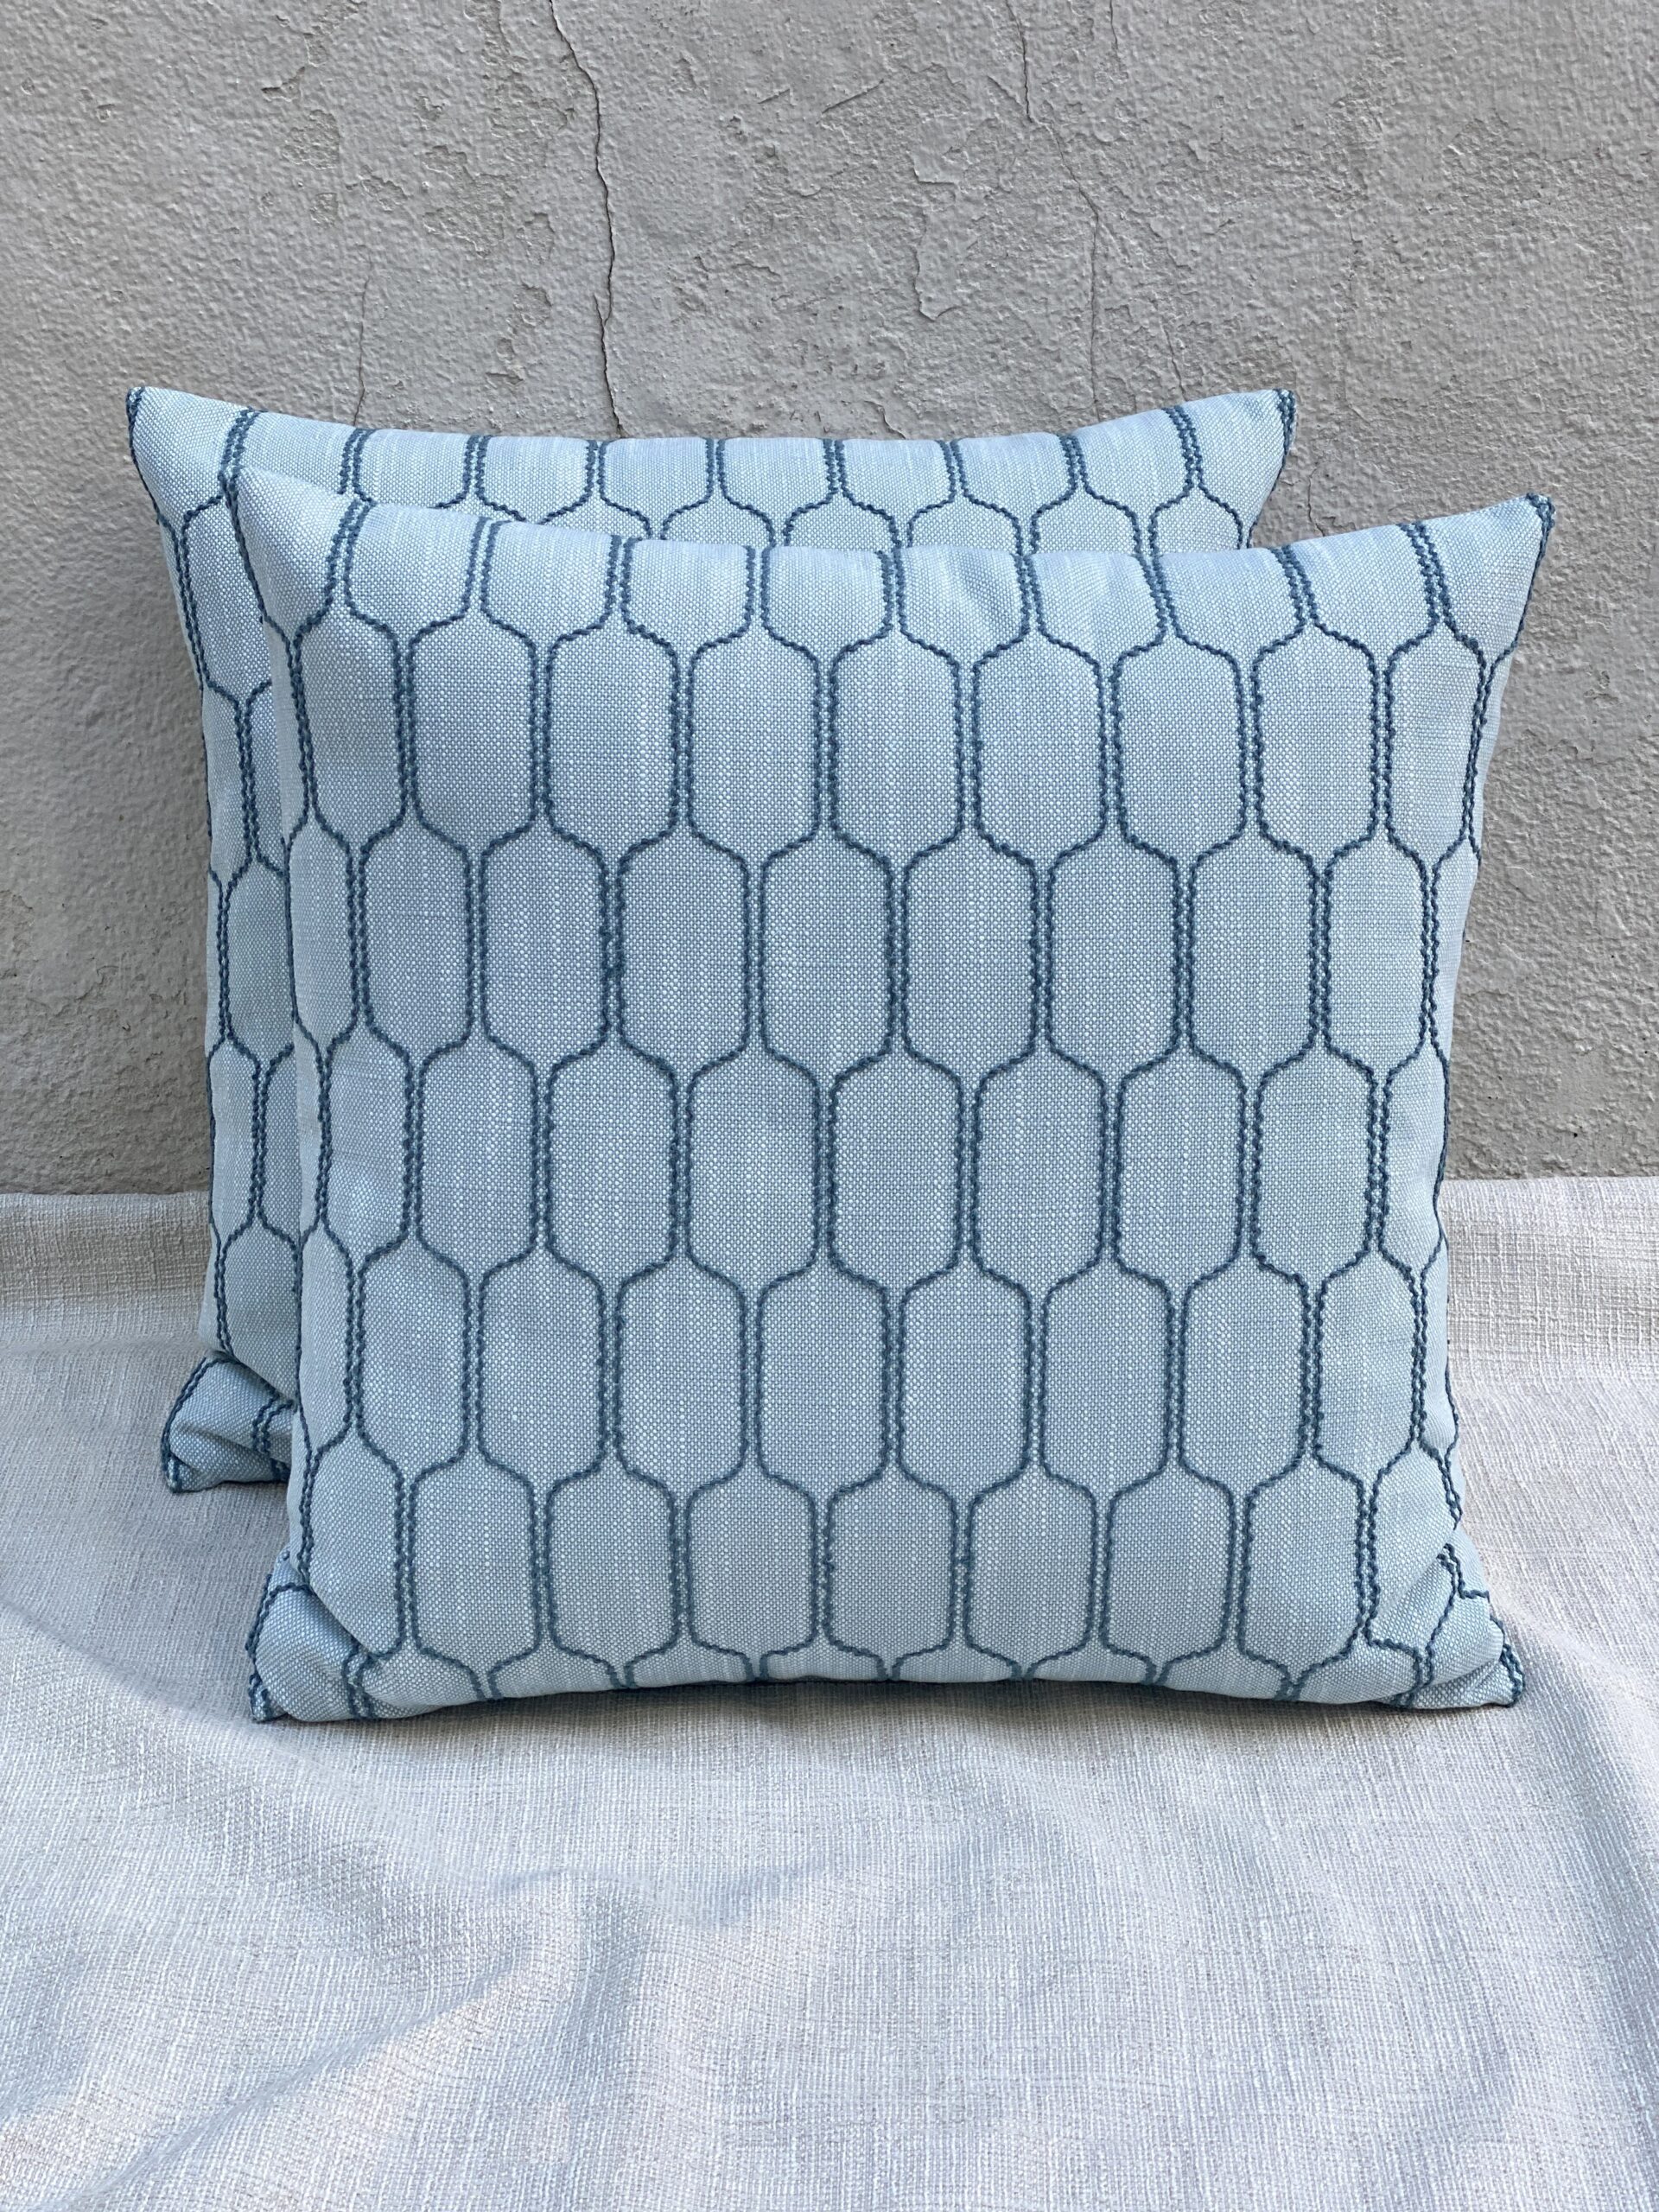 MaterialWorks Terrace Pillows